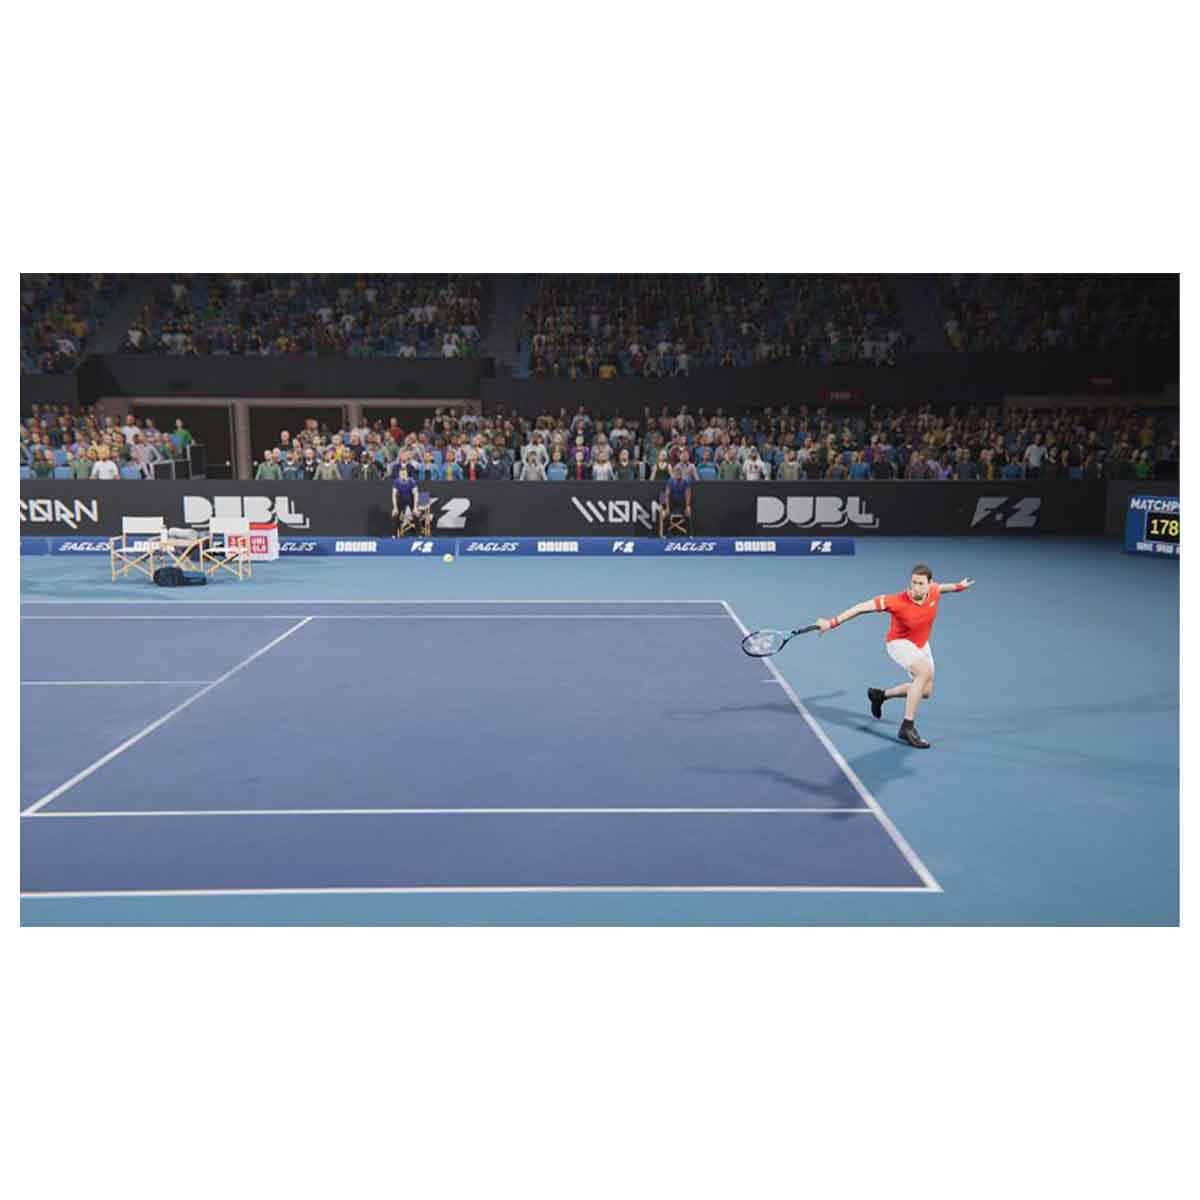 Matchpoint Tennis Championships On Steam